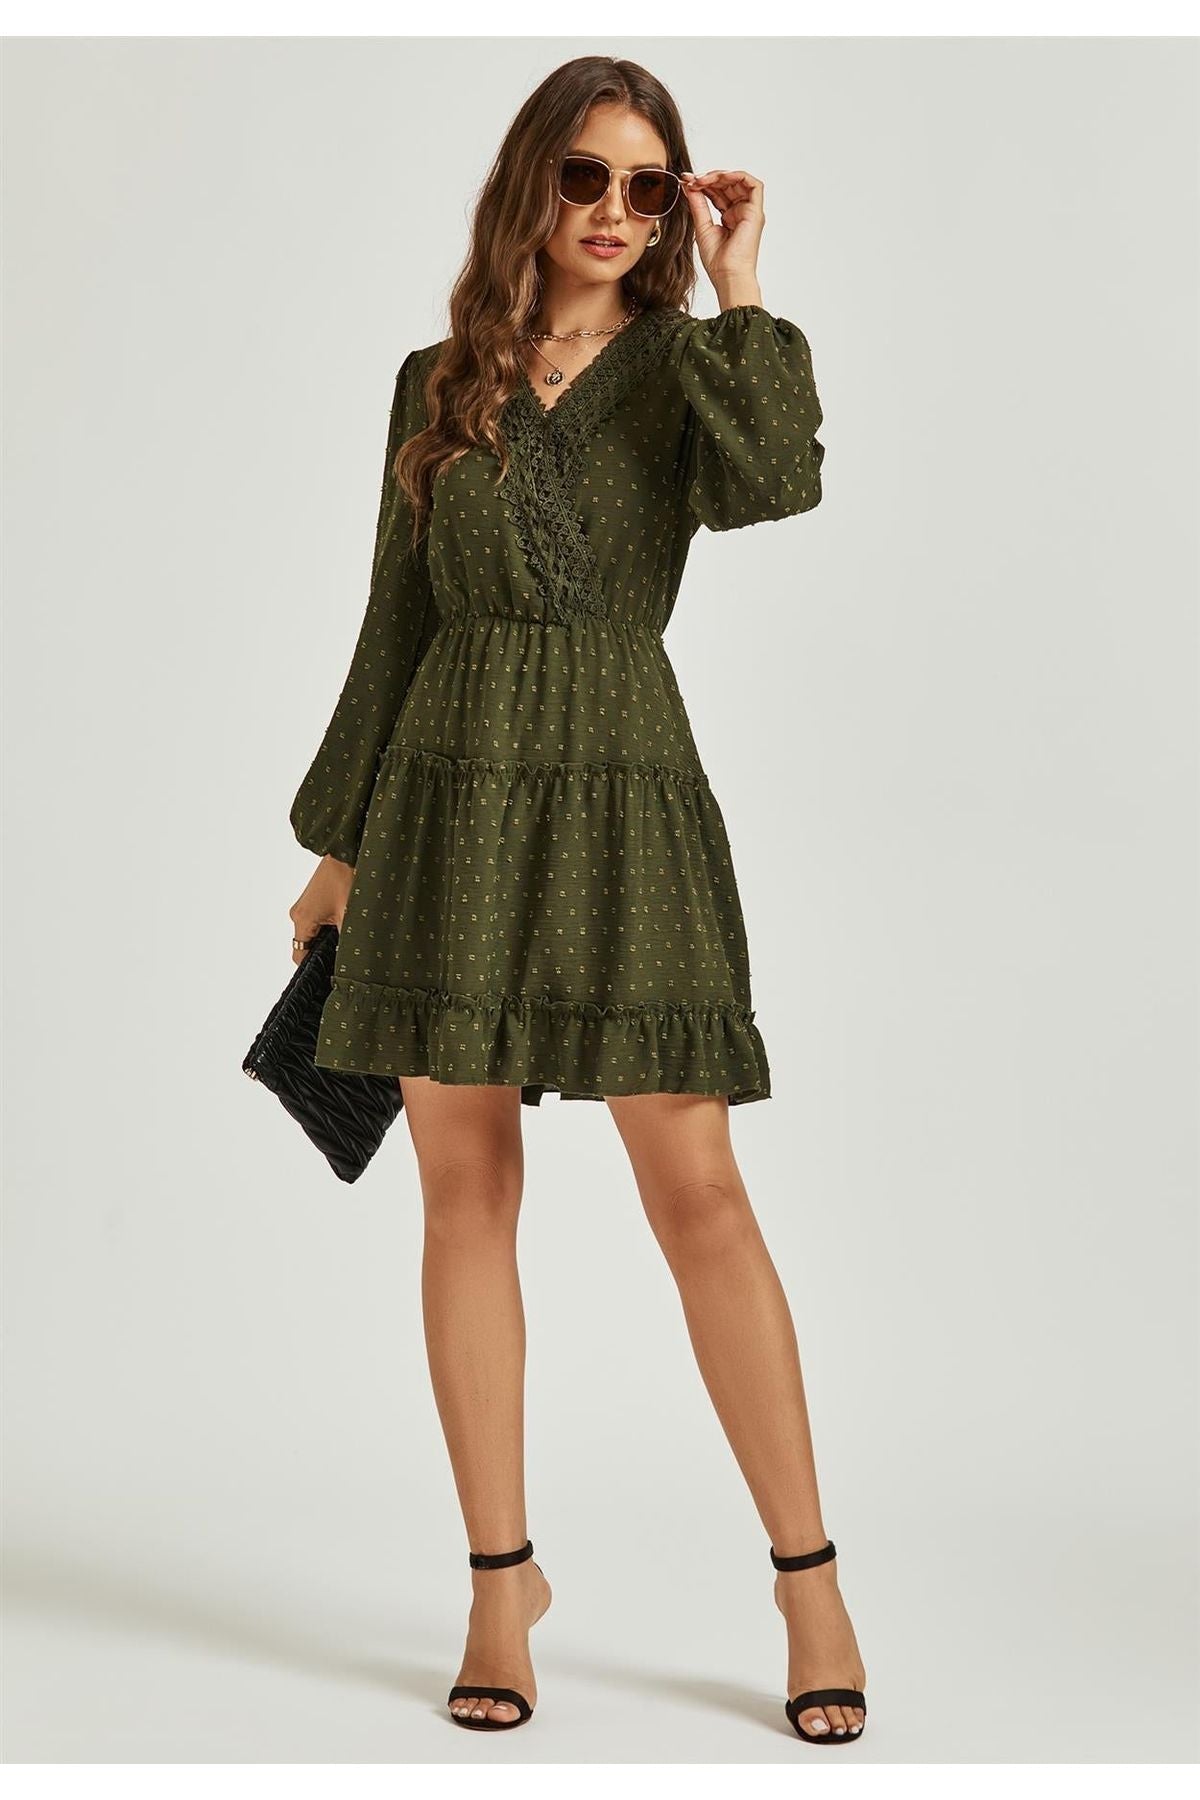 Long Sleeve Lace Detail Wrap Style Tulle Frill Mini Dress In Olive Green FS495-OliveGreen